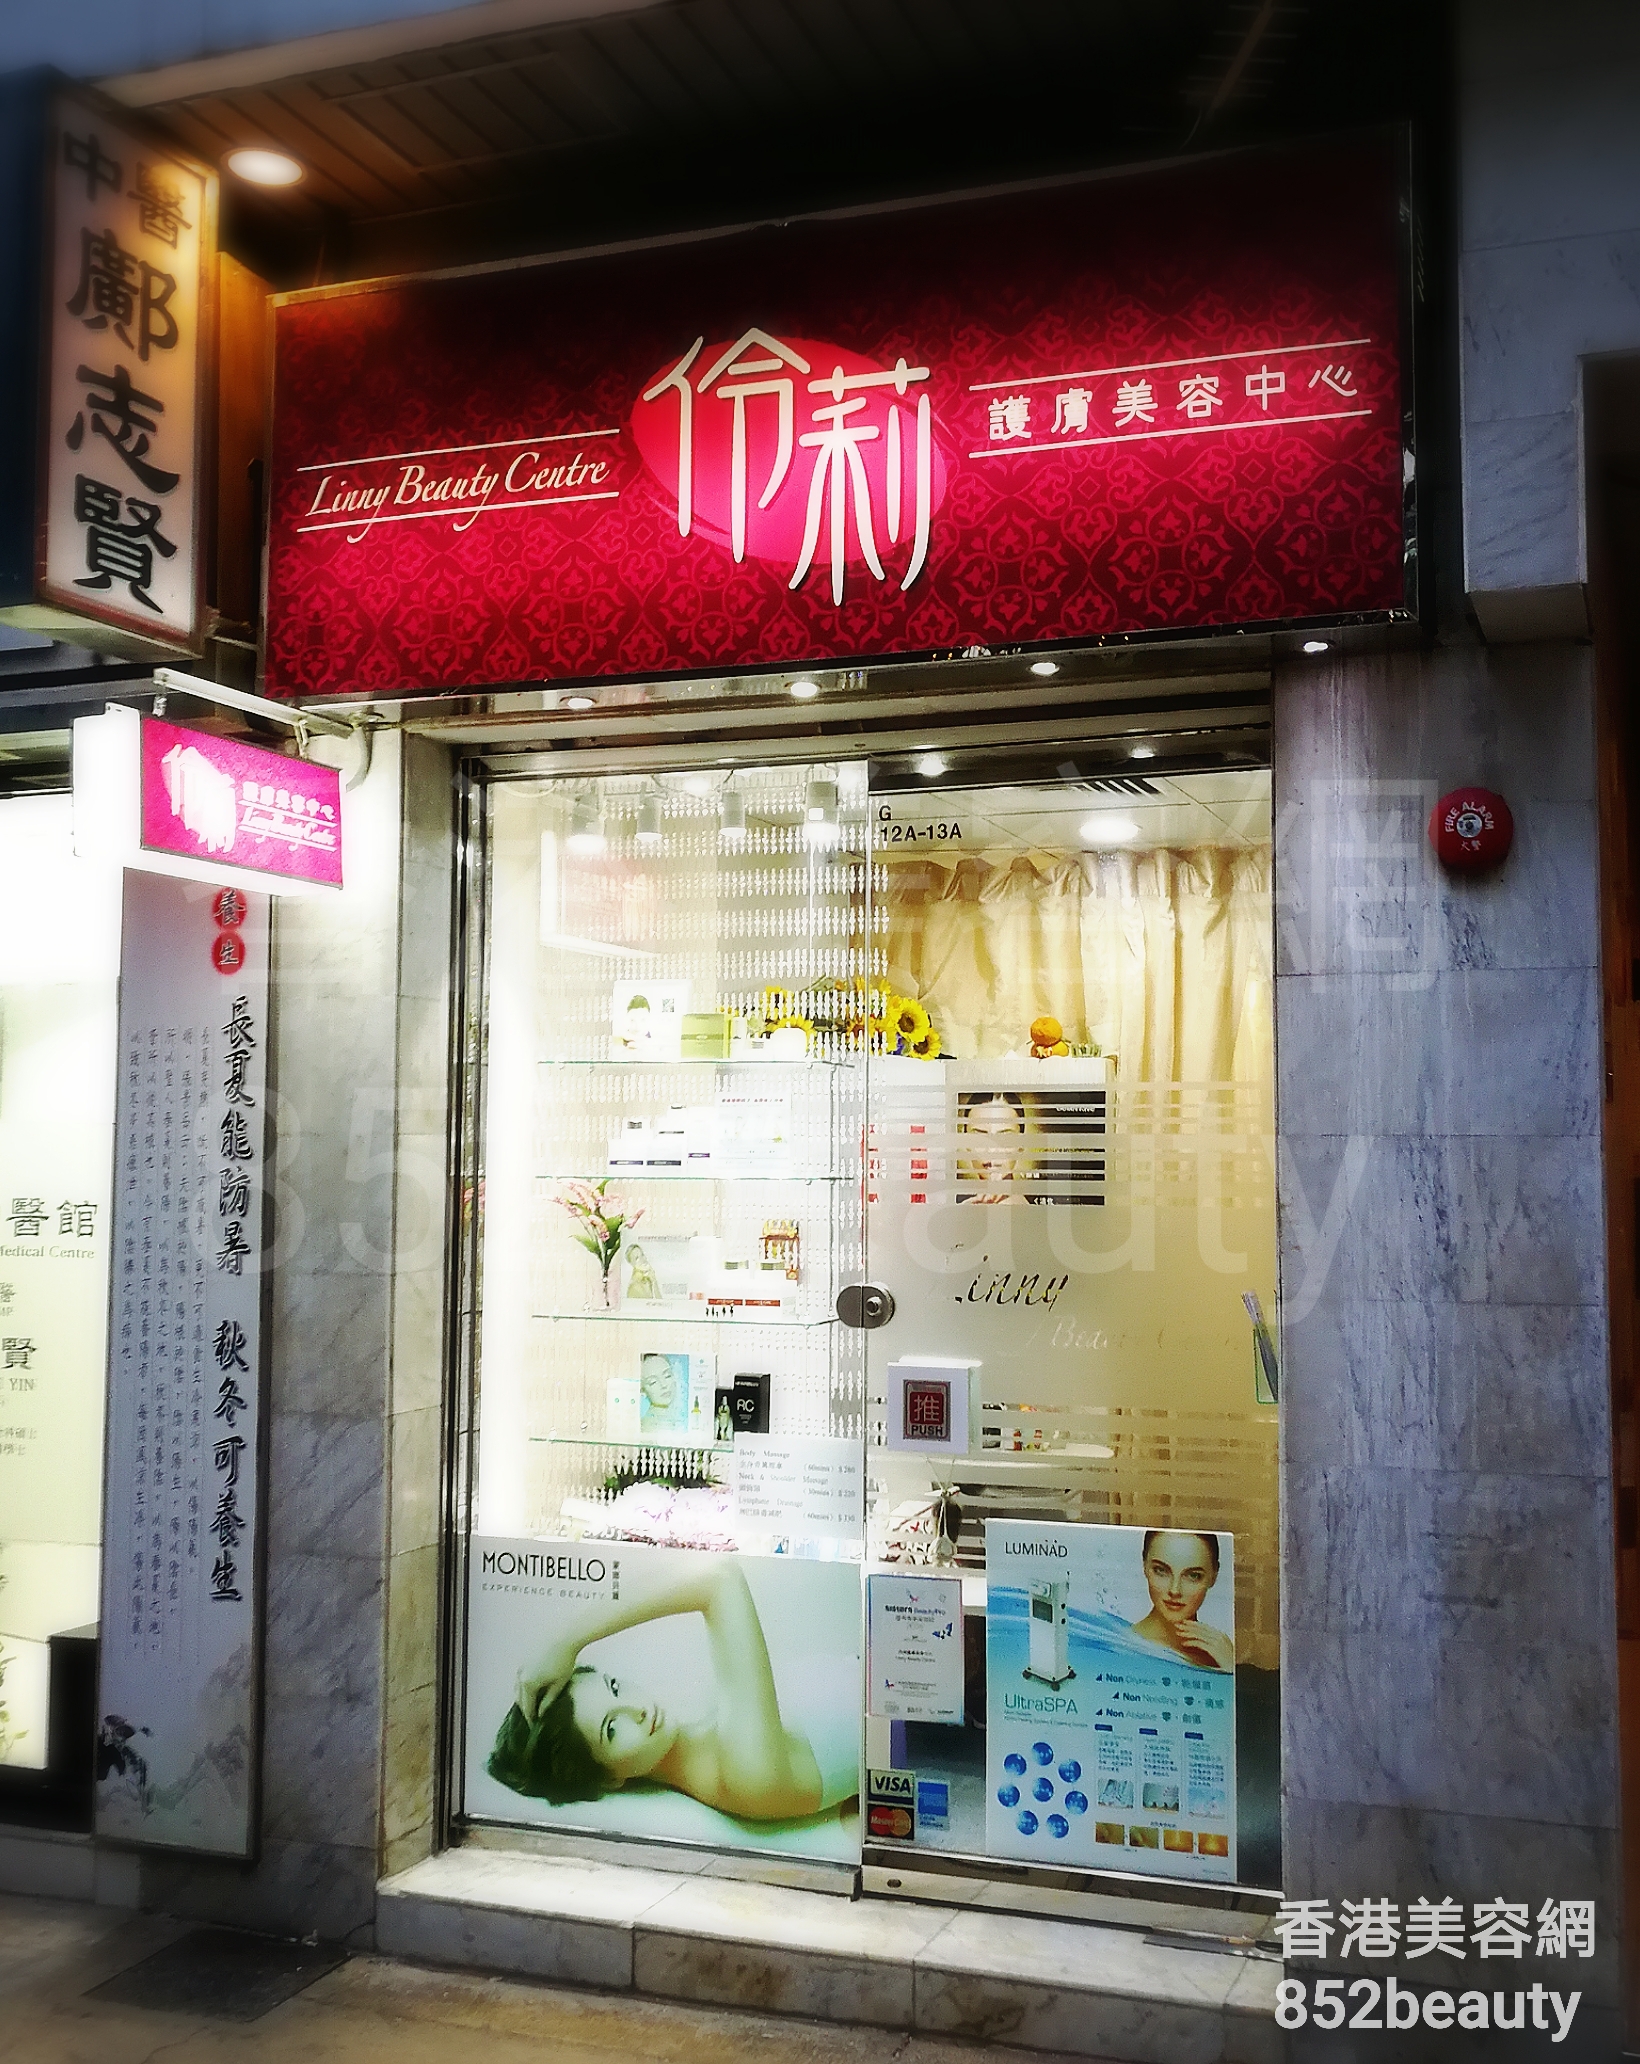 Hair Removal: 伶莉 Linny Beauty Centre